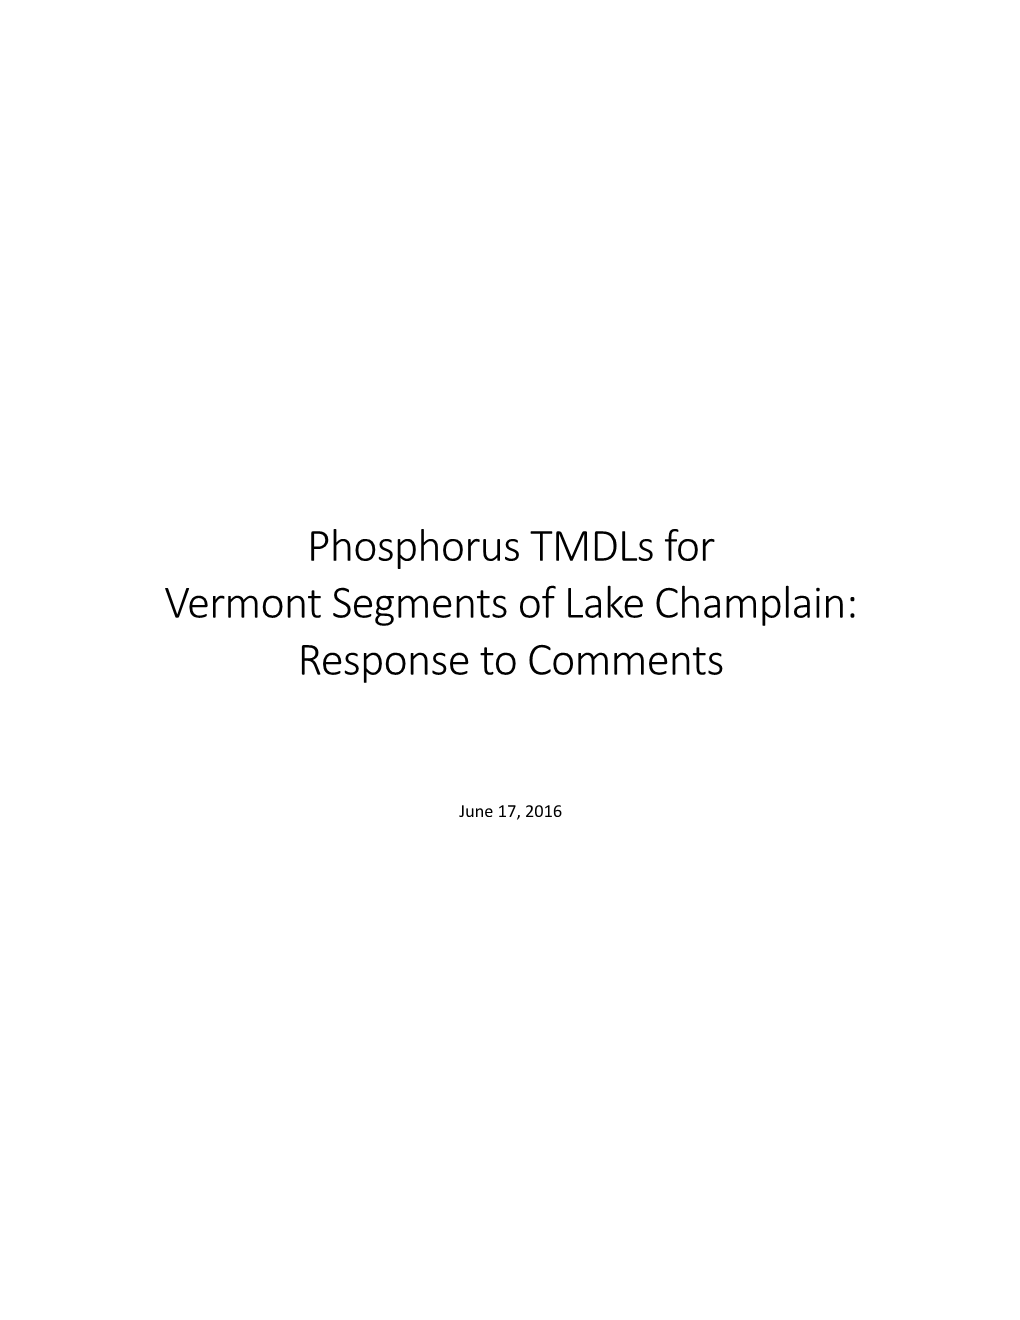 Lake Champlain TMDL Response to Comments